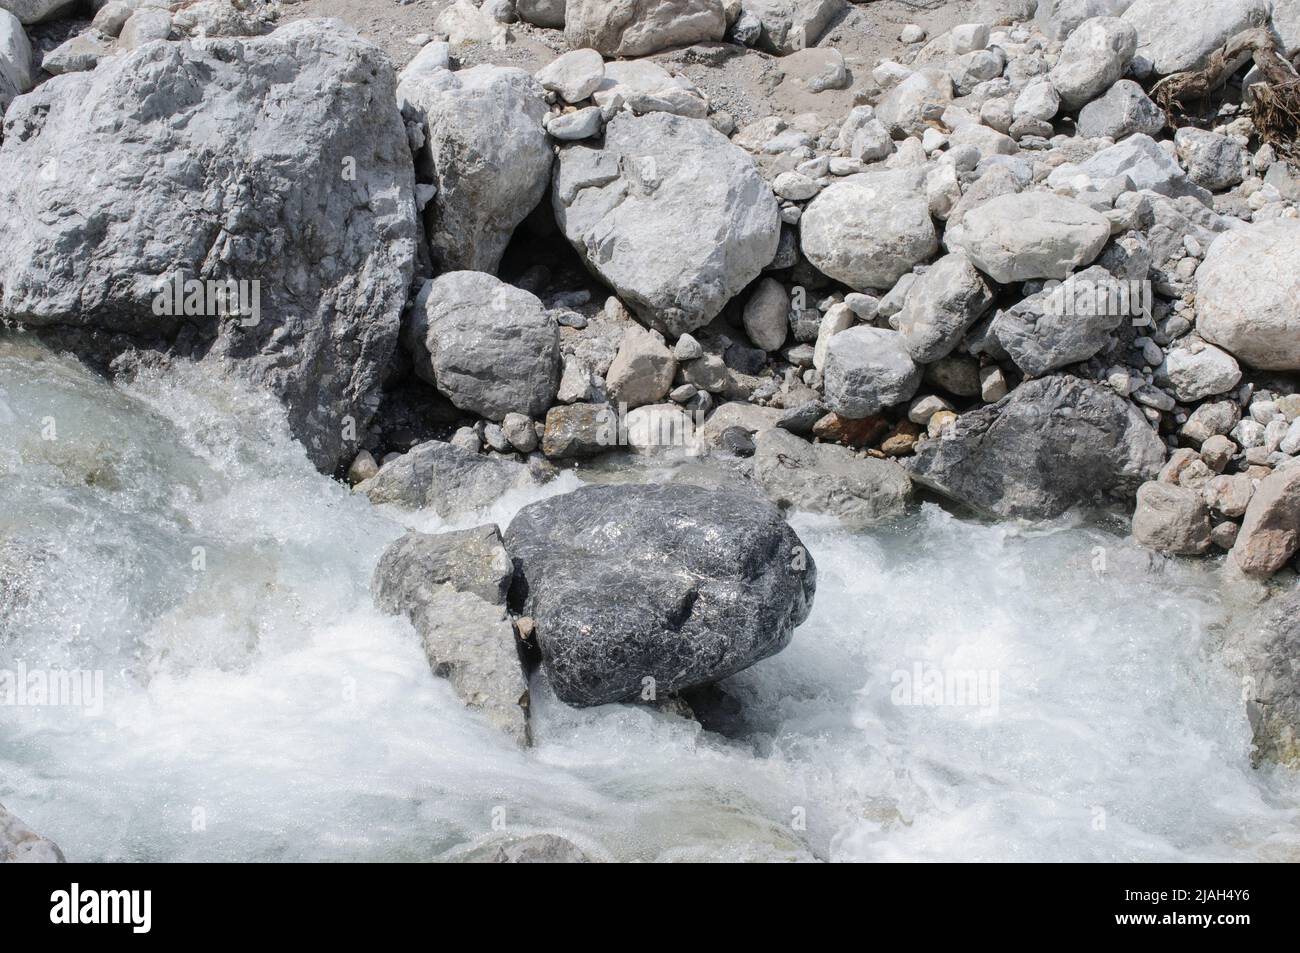 Königssee river with amazing rocks Stock Photo